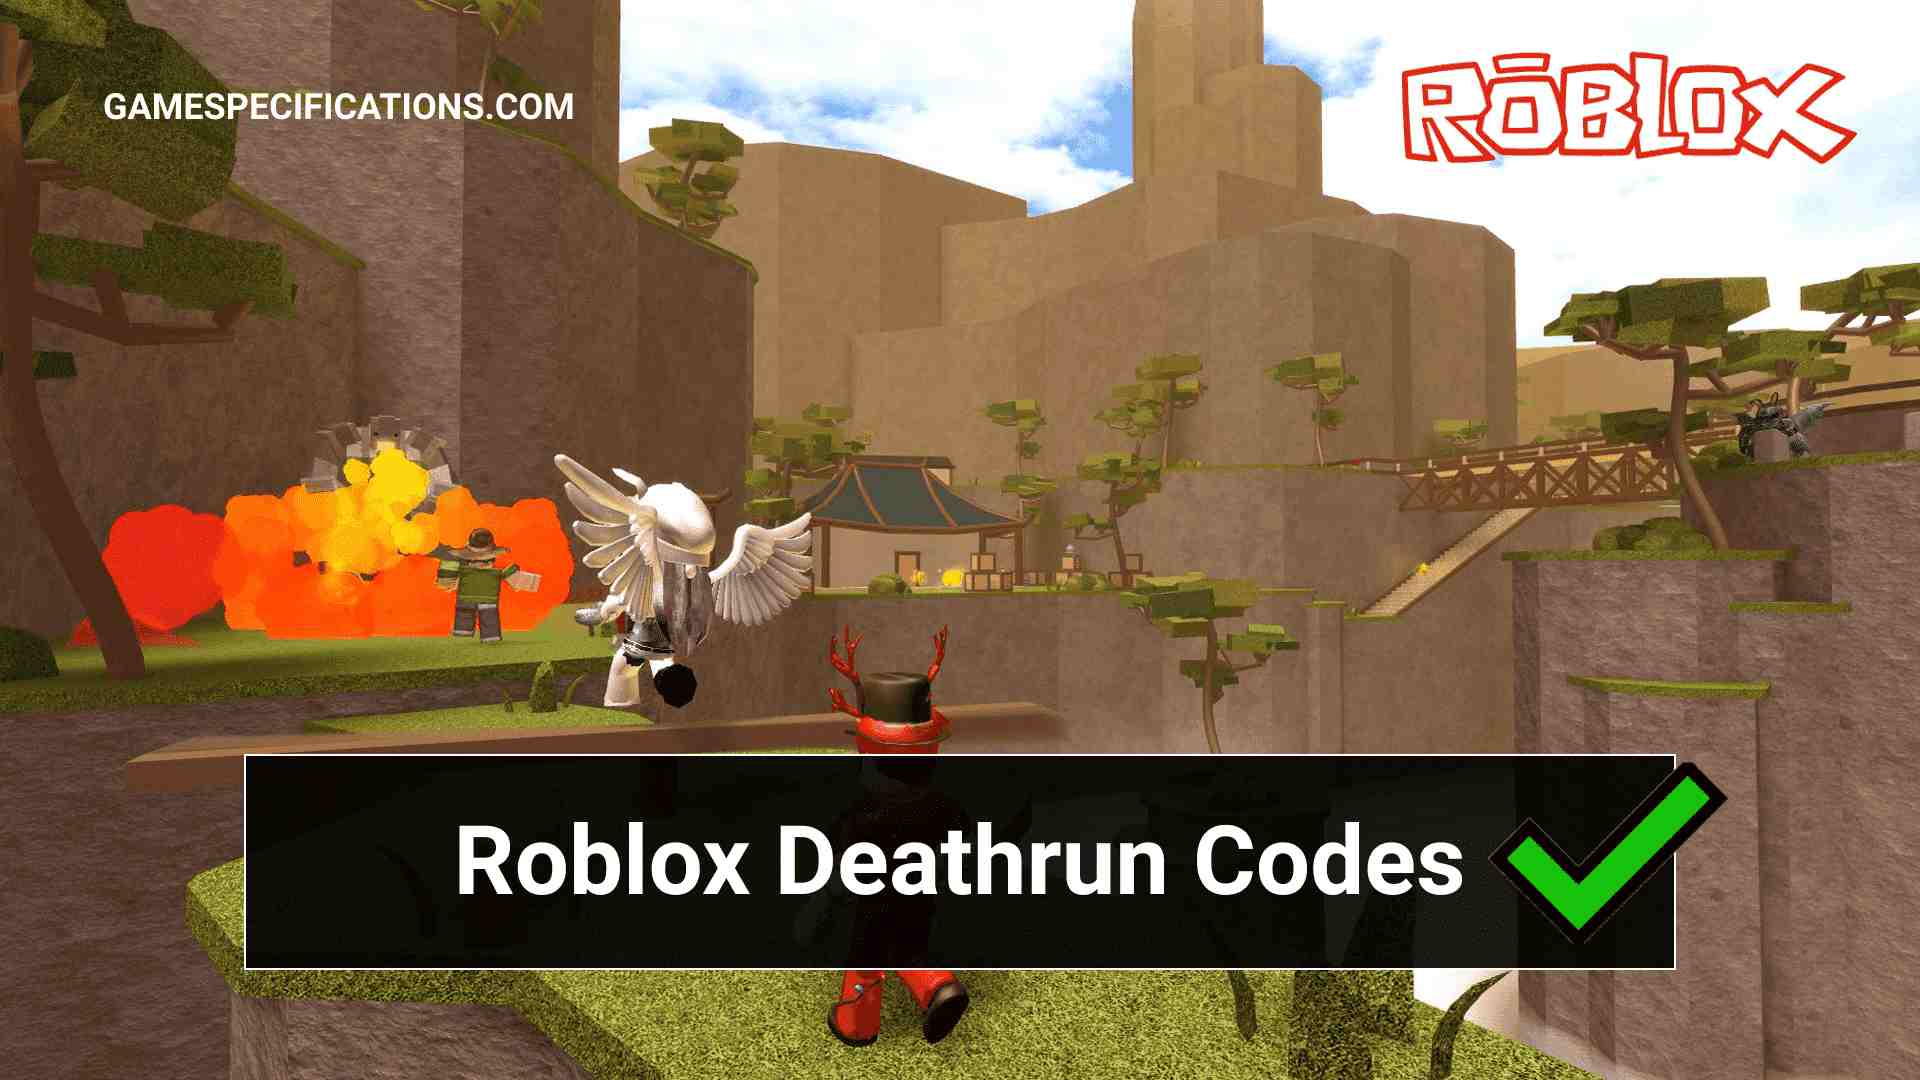 Roblox Deathrun Codes July 2021 Game Specifications - codes for roblox deathrun twitter